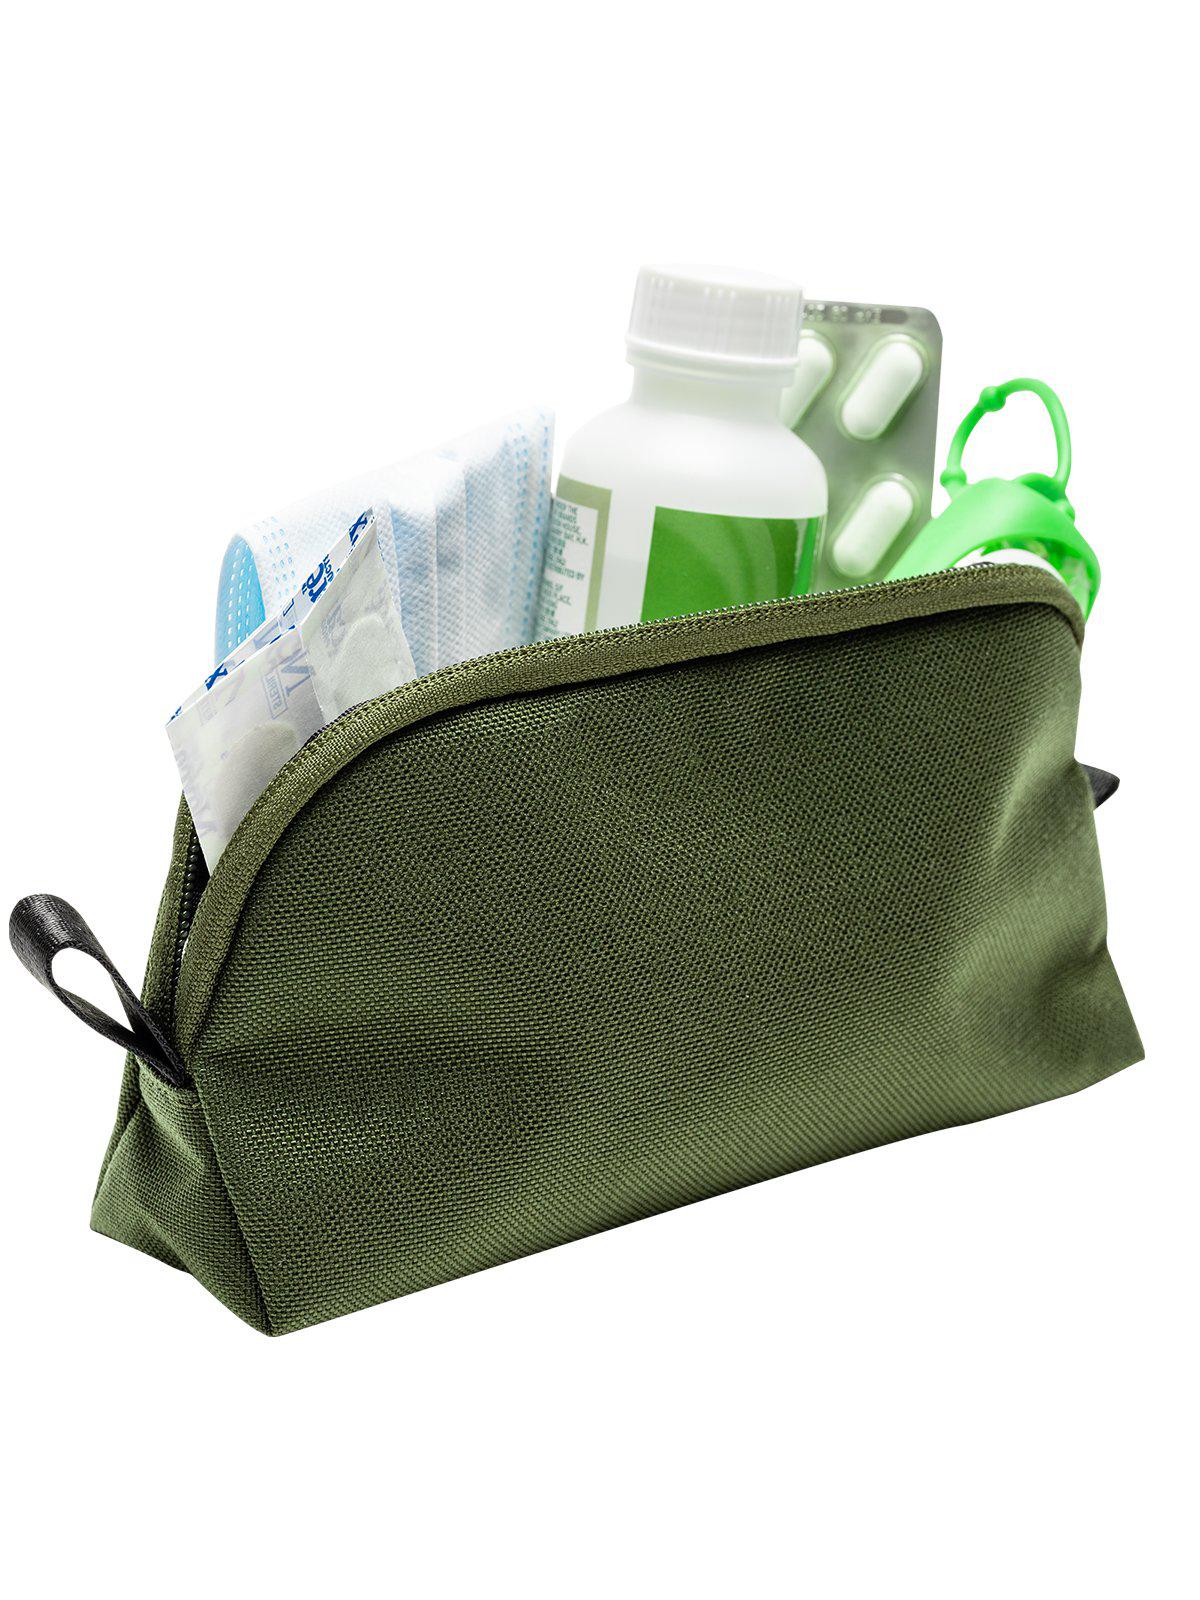 Able Carry Stash Pouch Cordura Olive - MORE by Morello Indonesia